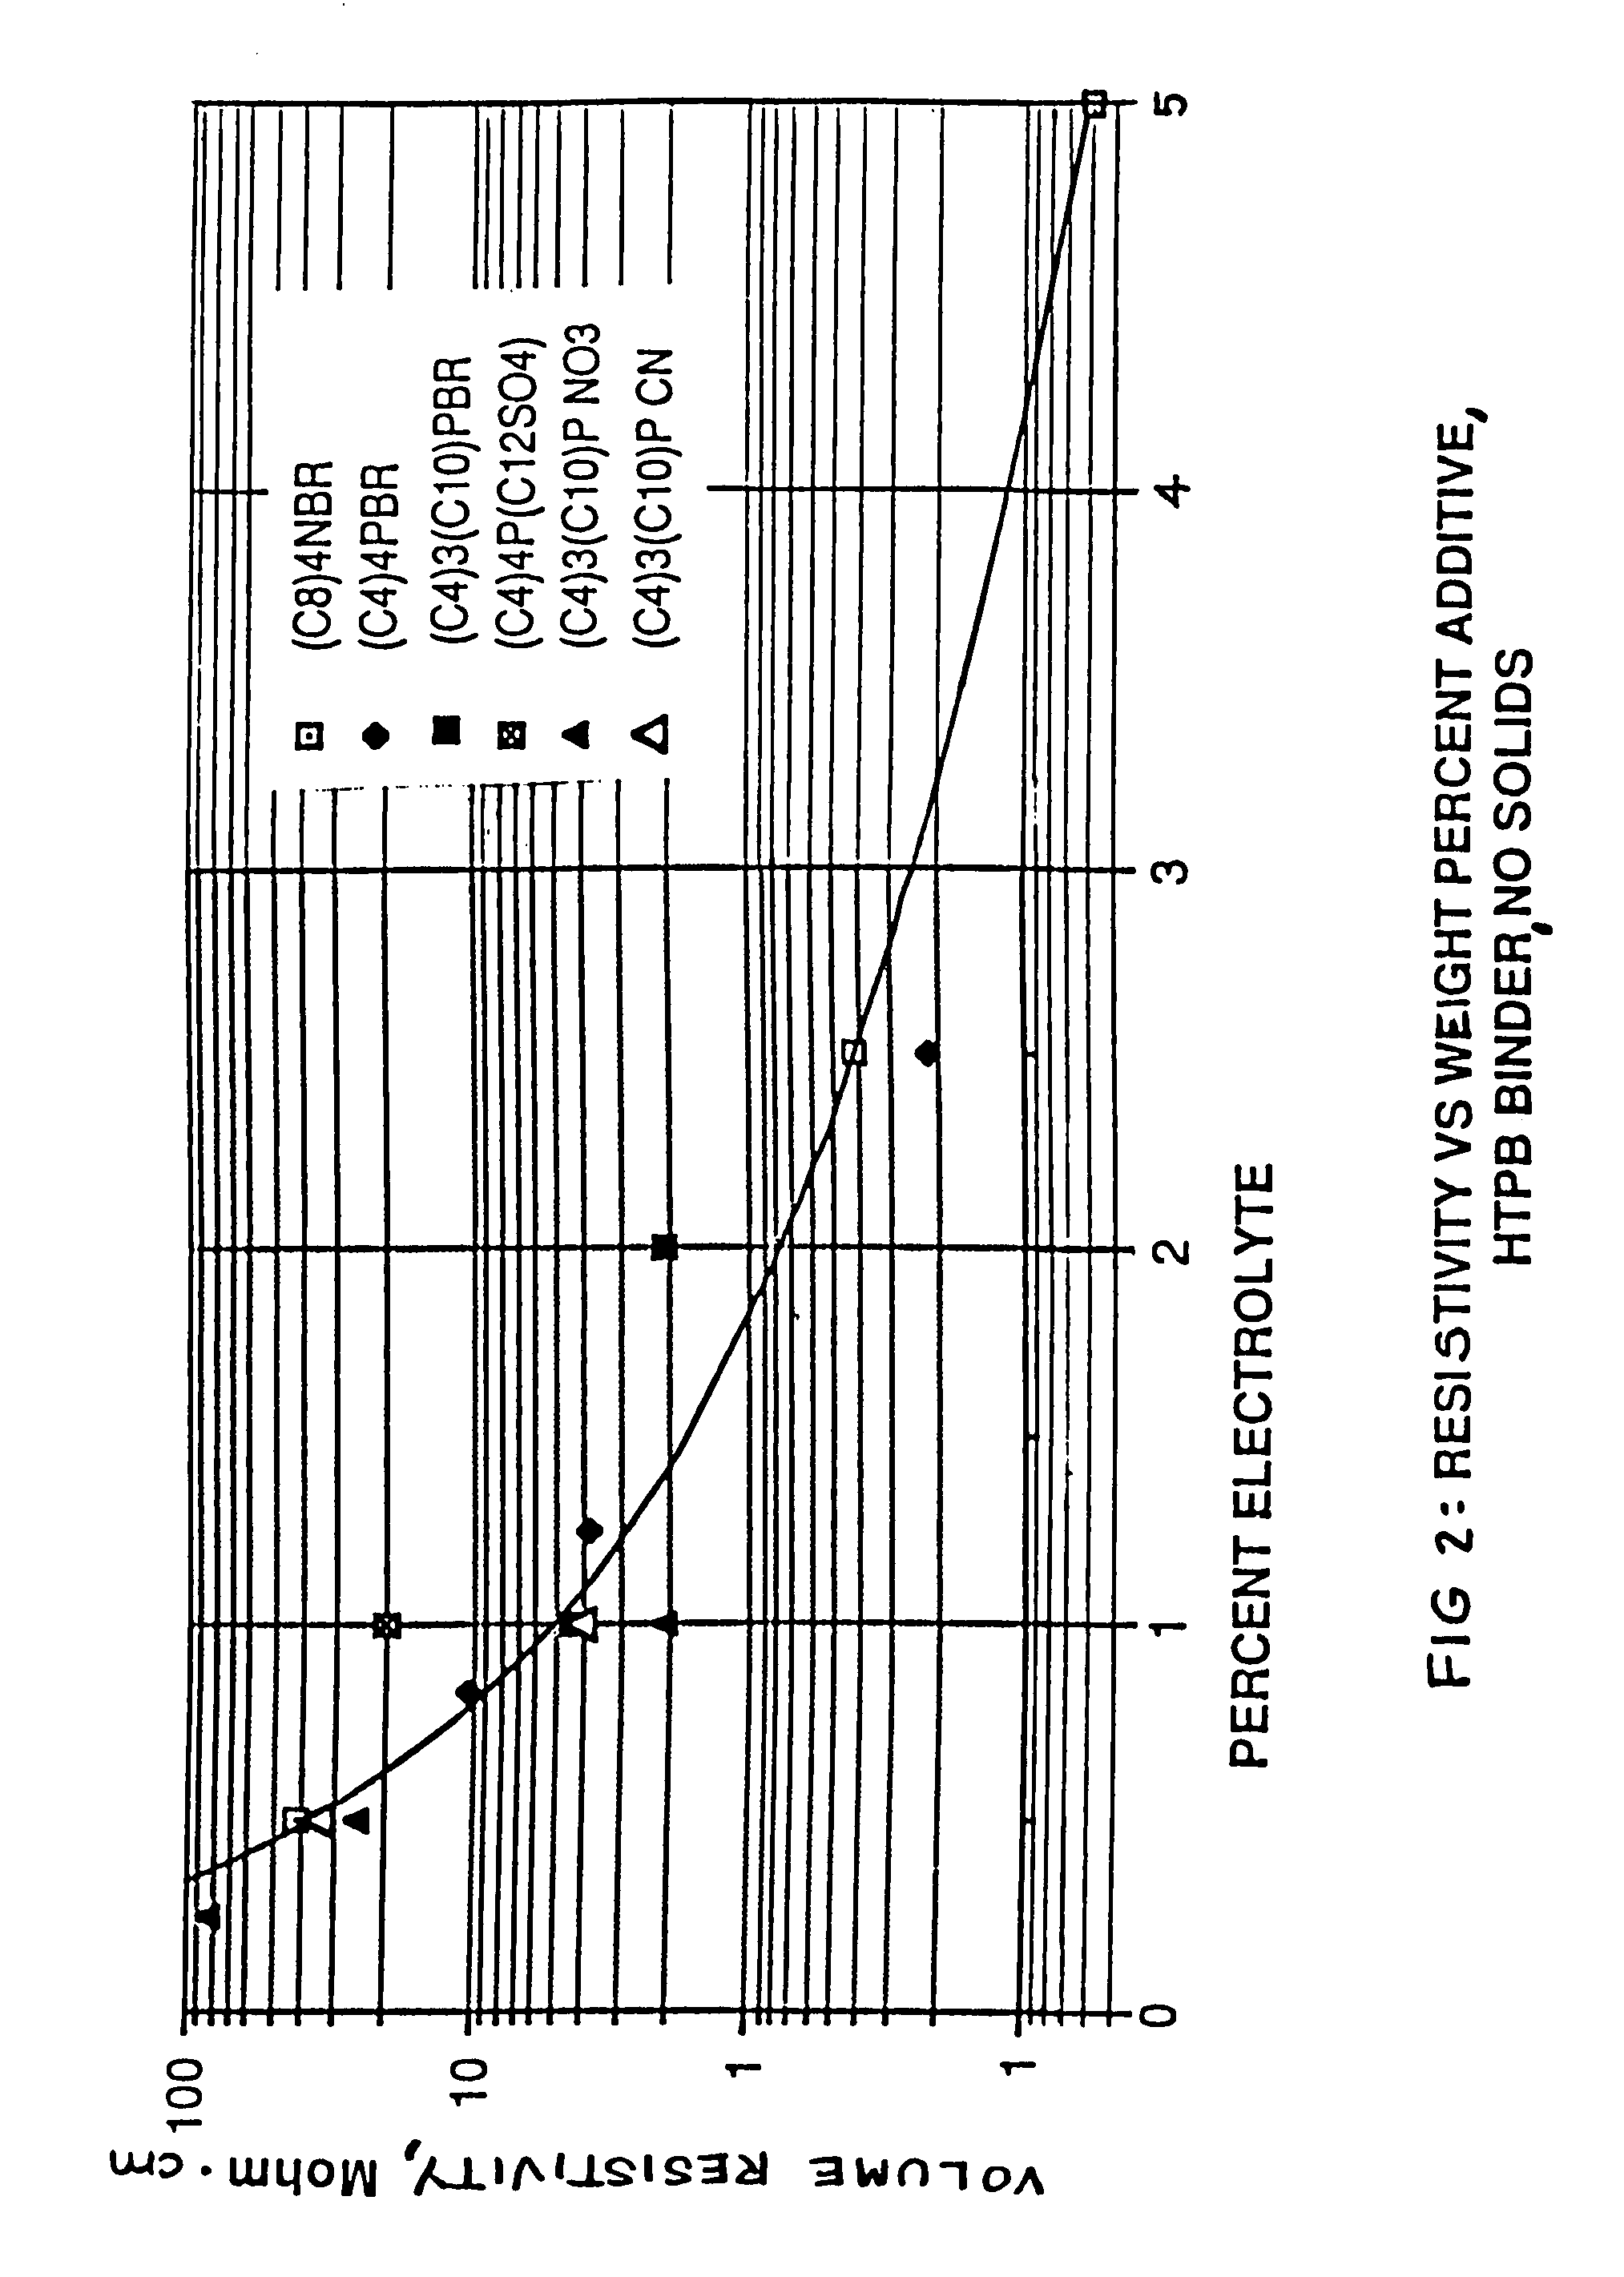 Method for reducing charge retention properties of solid propellants